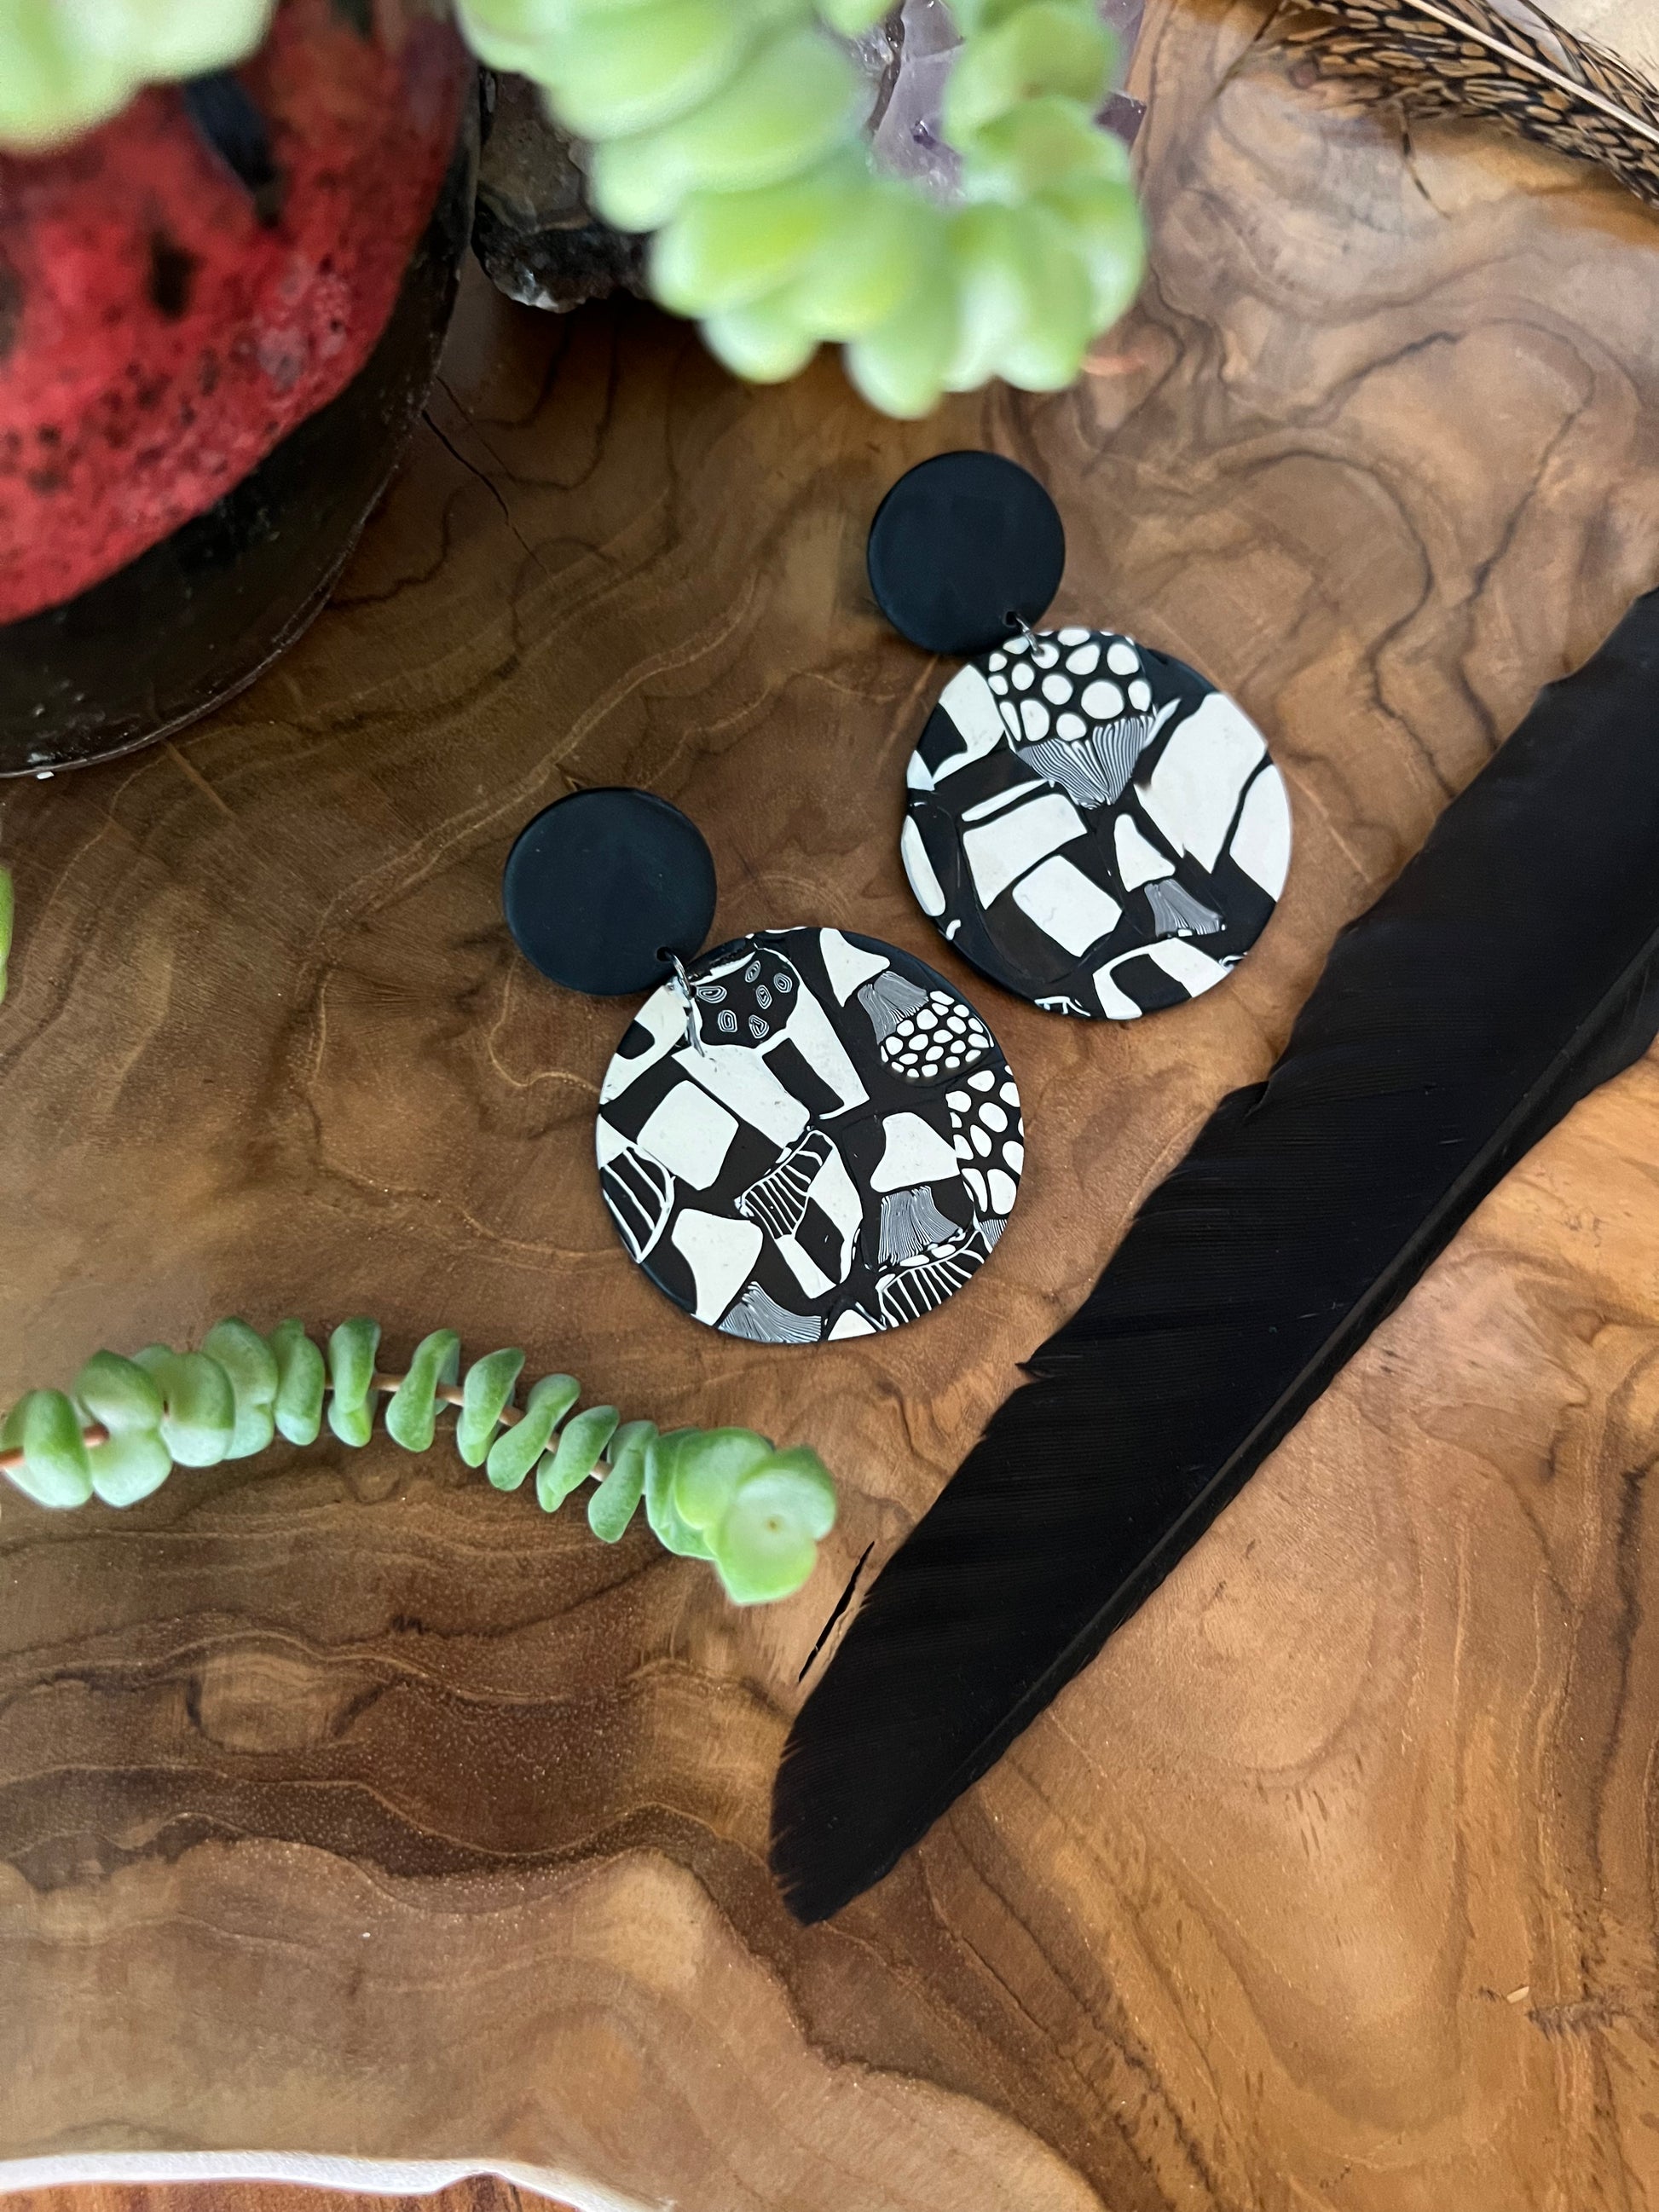 Complete your look with our adorable round mushroom earrings, crafted from polymer clay. These whimsical accessories add a touch of woodland charm to any outfit. Embrace nature-inspired style with these delightful statement earrings.